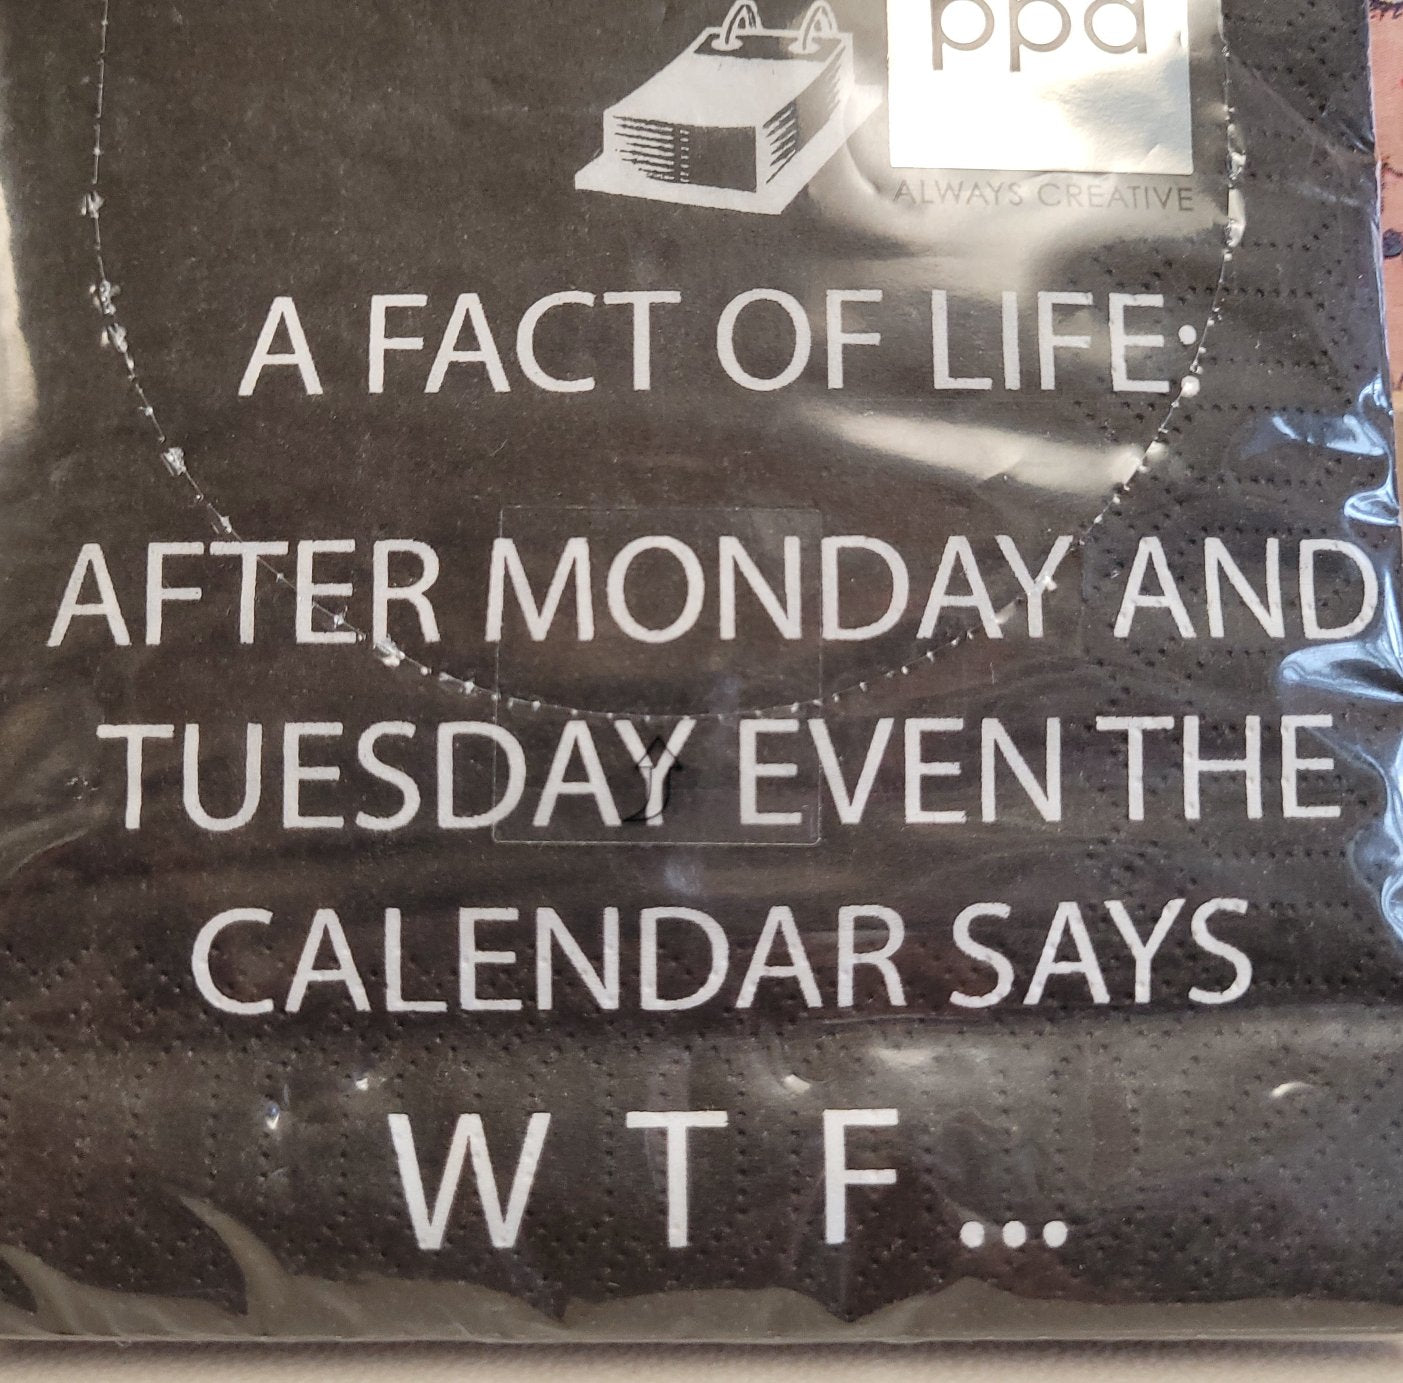 A Fact Of Life WTF Cocktail Napkins